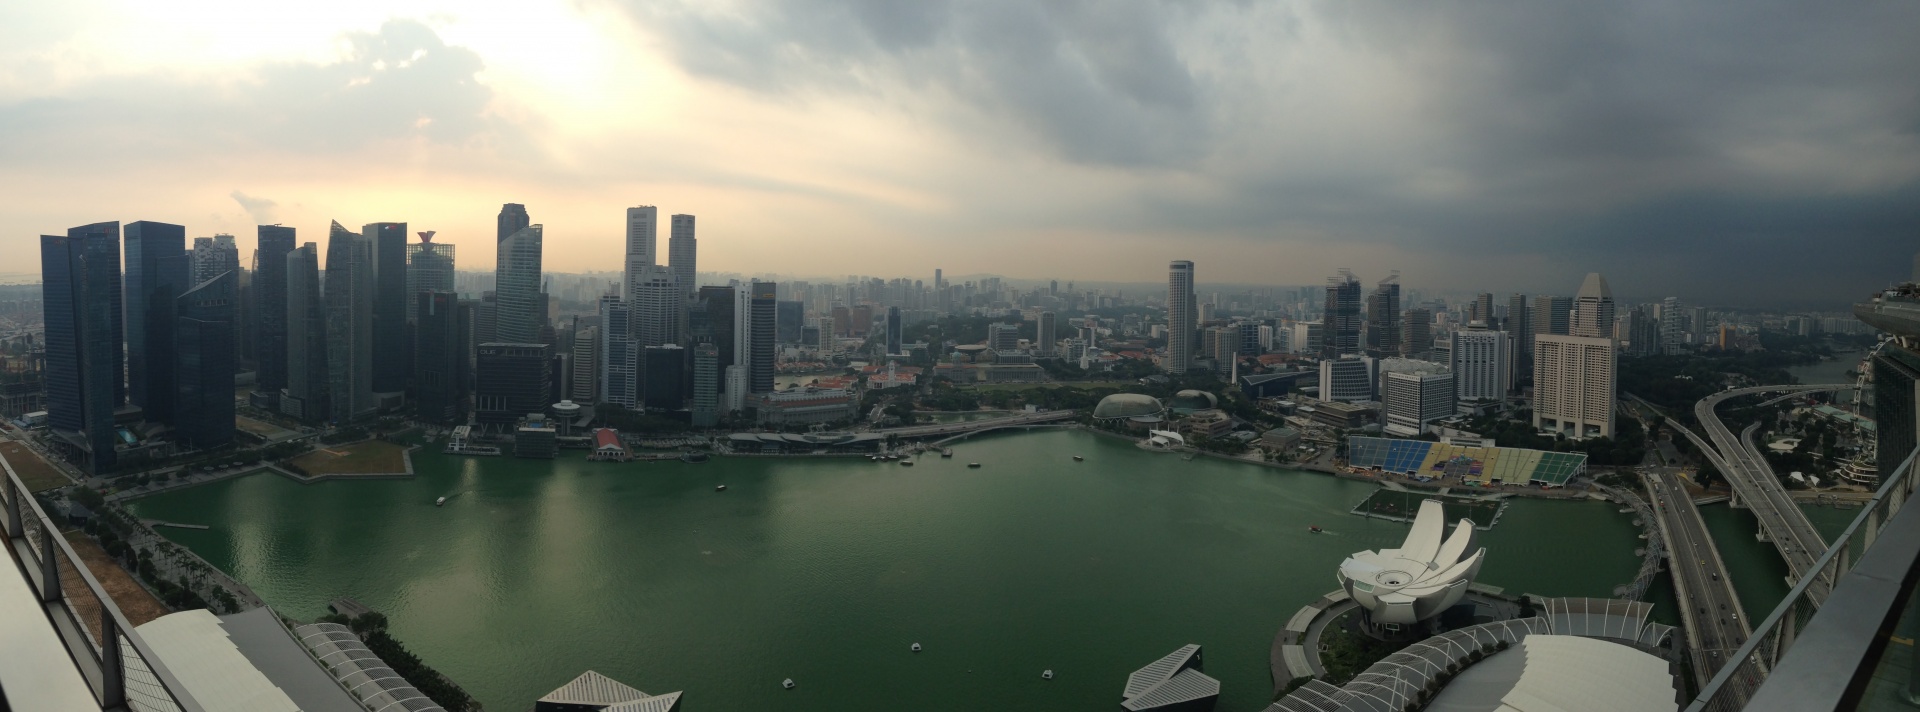 Singapore skyline view from the Marian Bay Sands Hotel